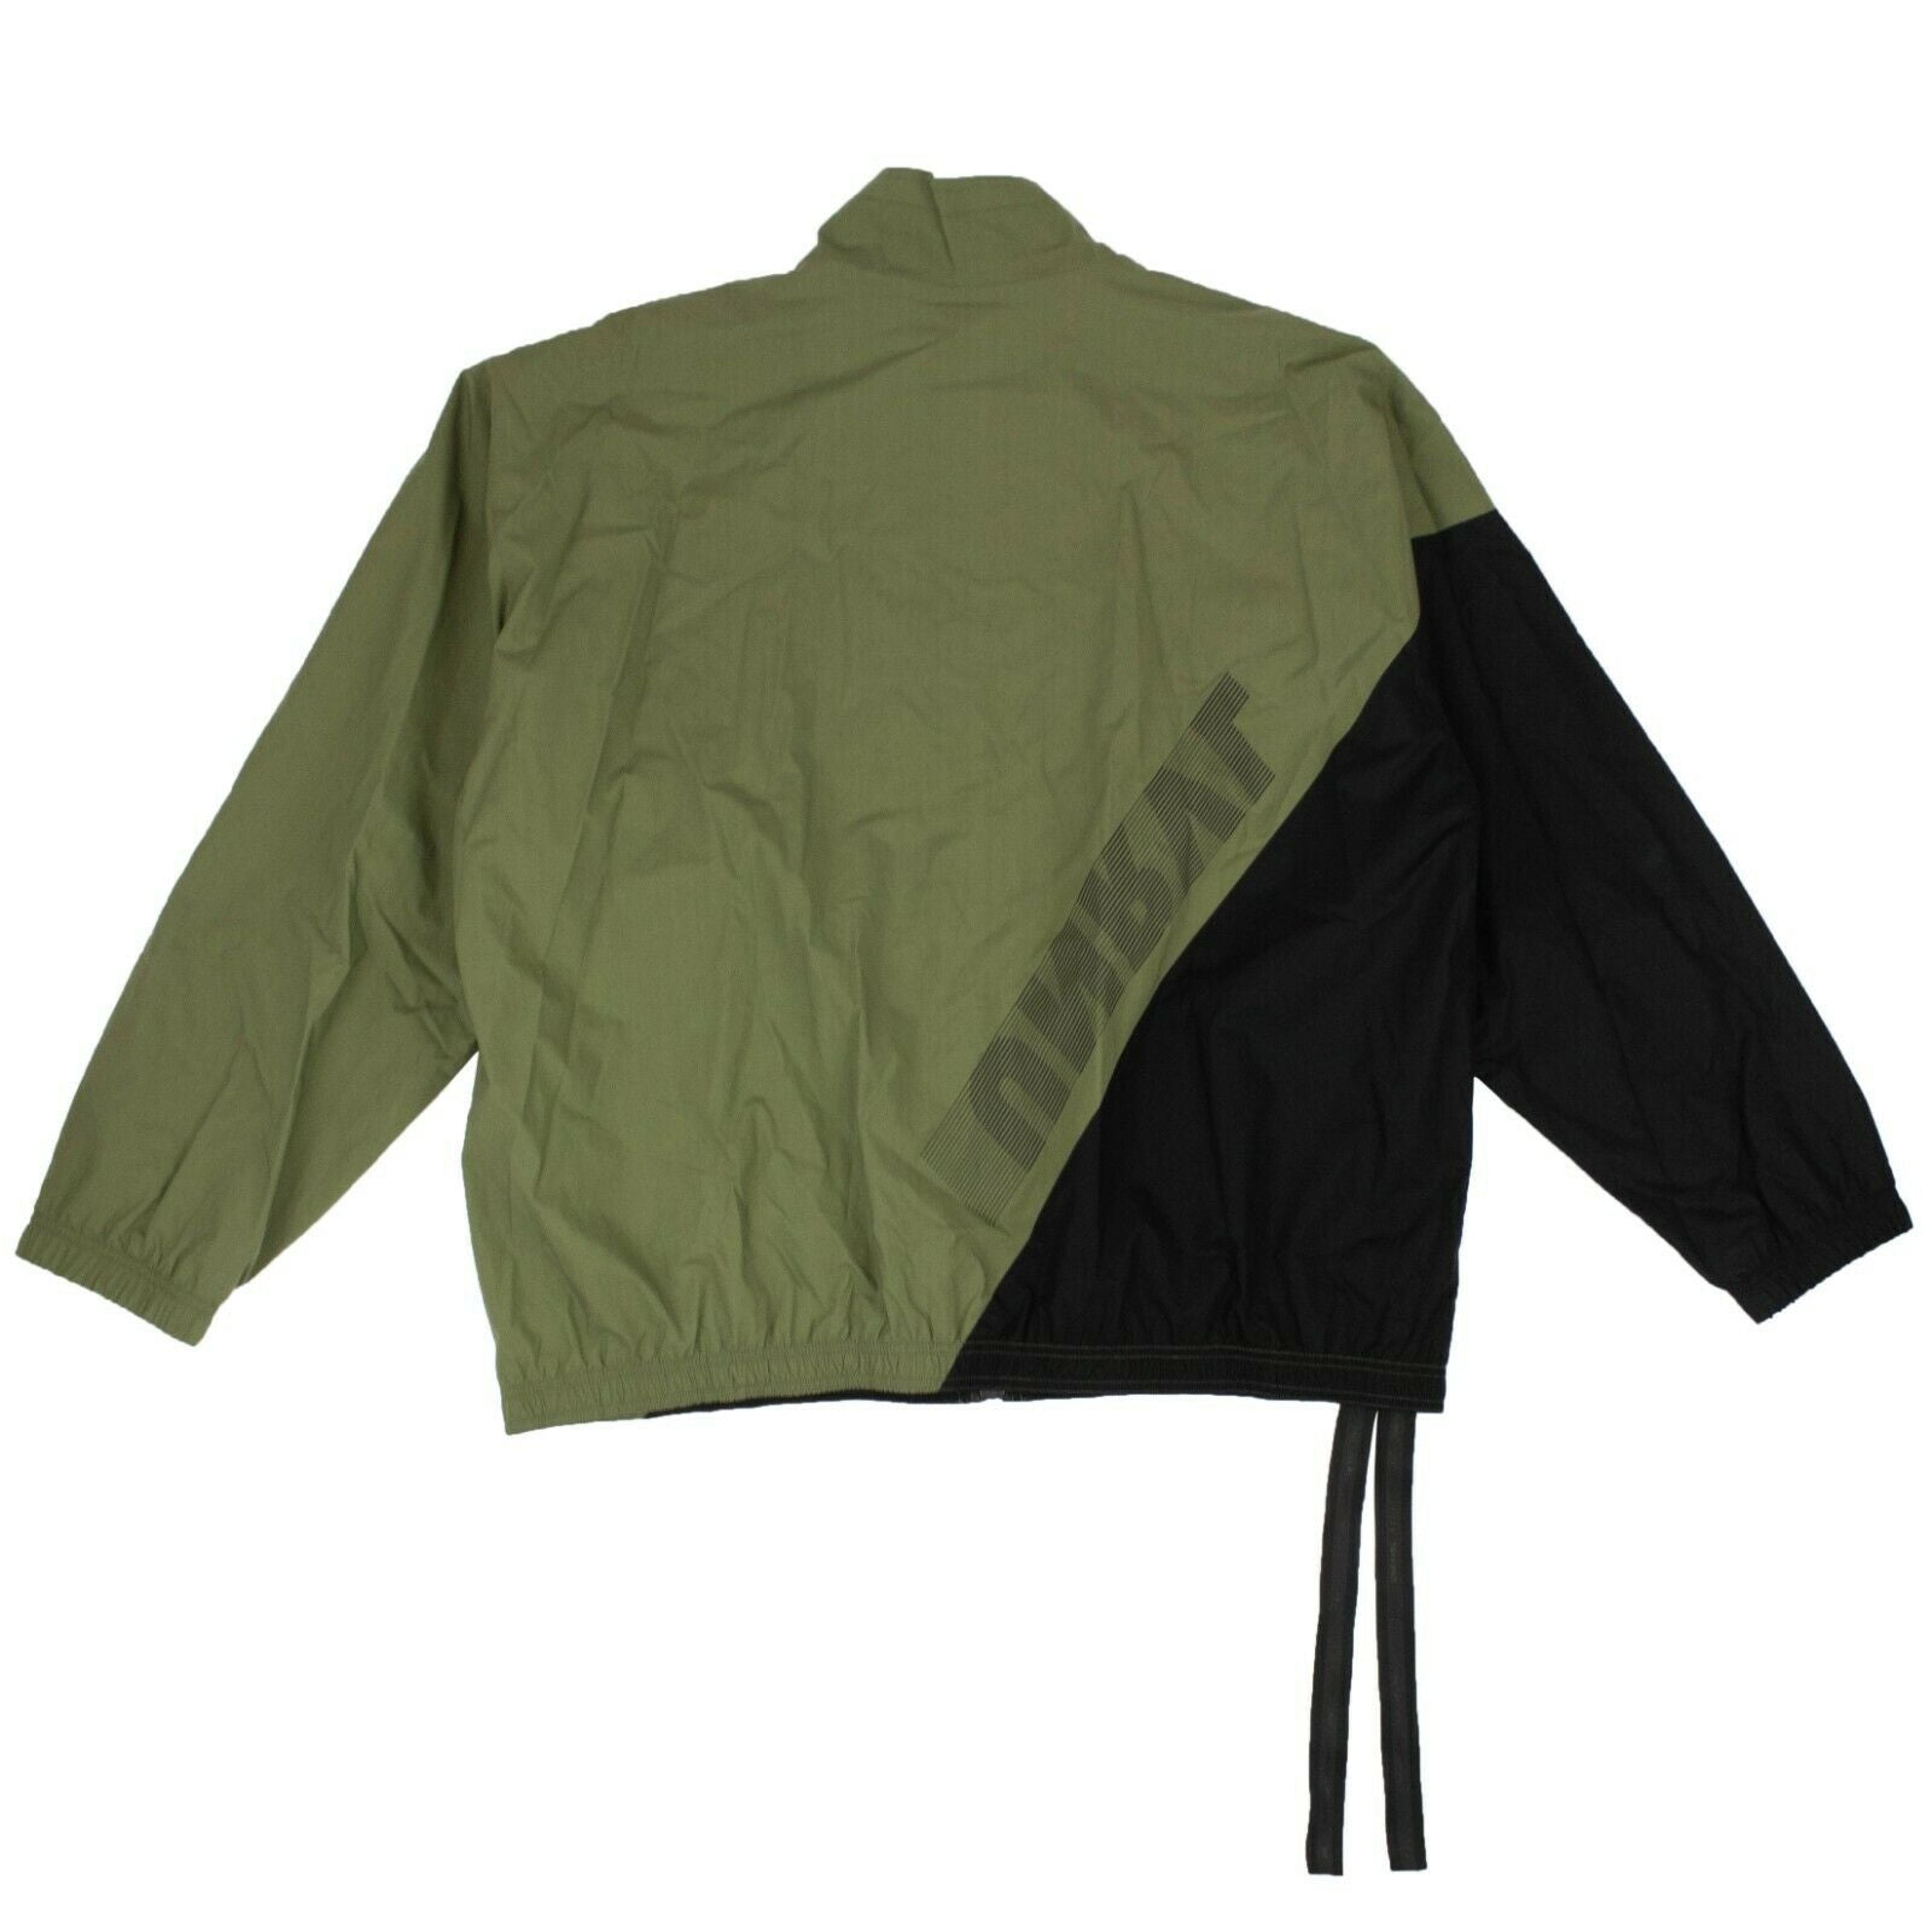 Alternate View 1 of Green And Black Panel Lightweight Jacket